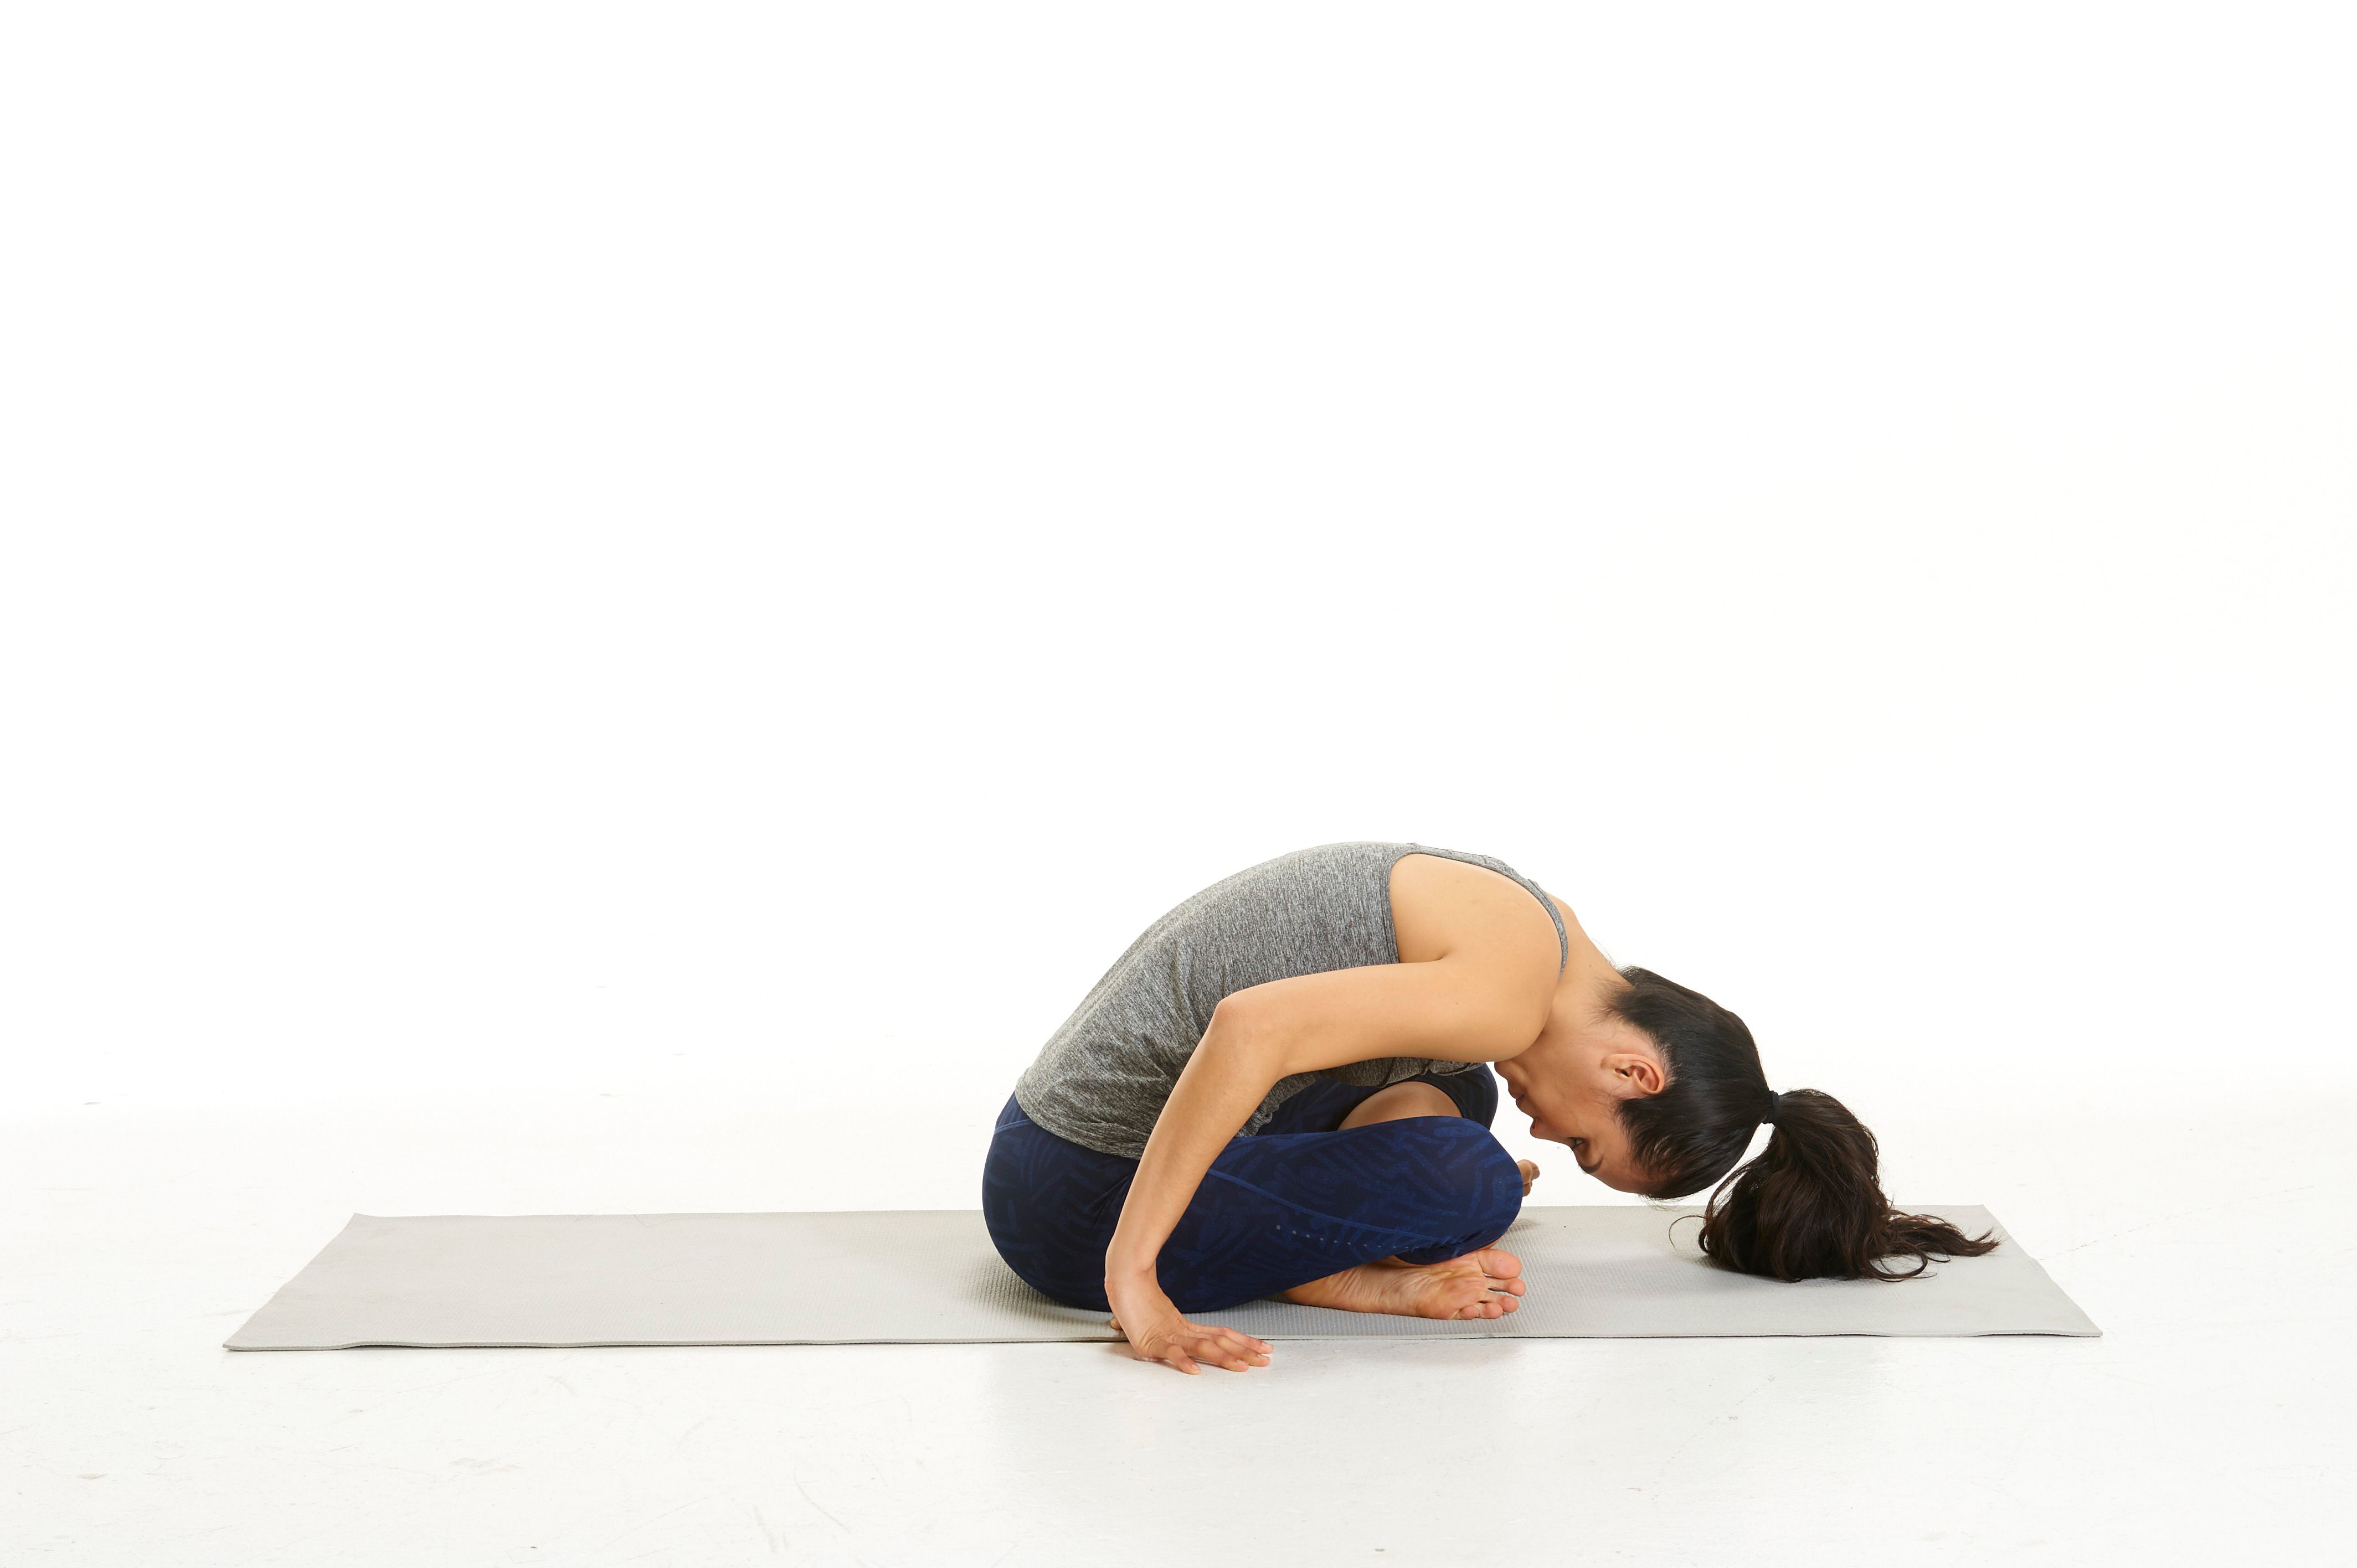 Practice Yoga Twists at the Wall to Increase Spinal Mobility - YogaUOnline